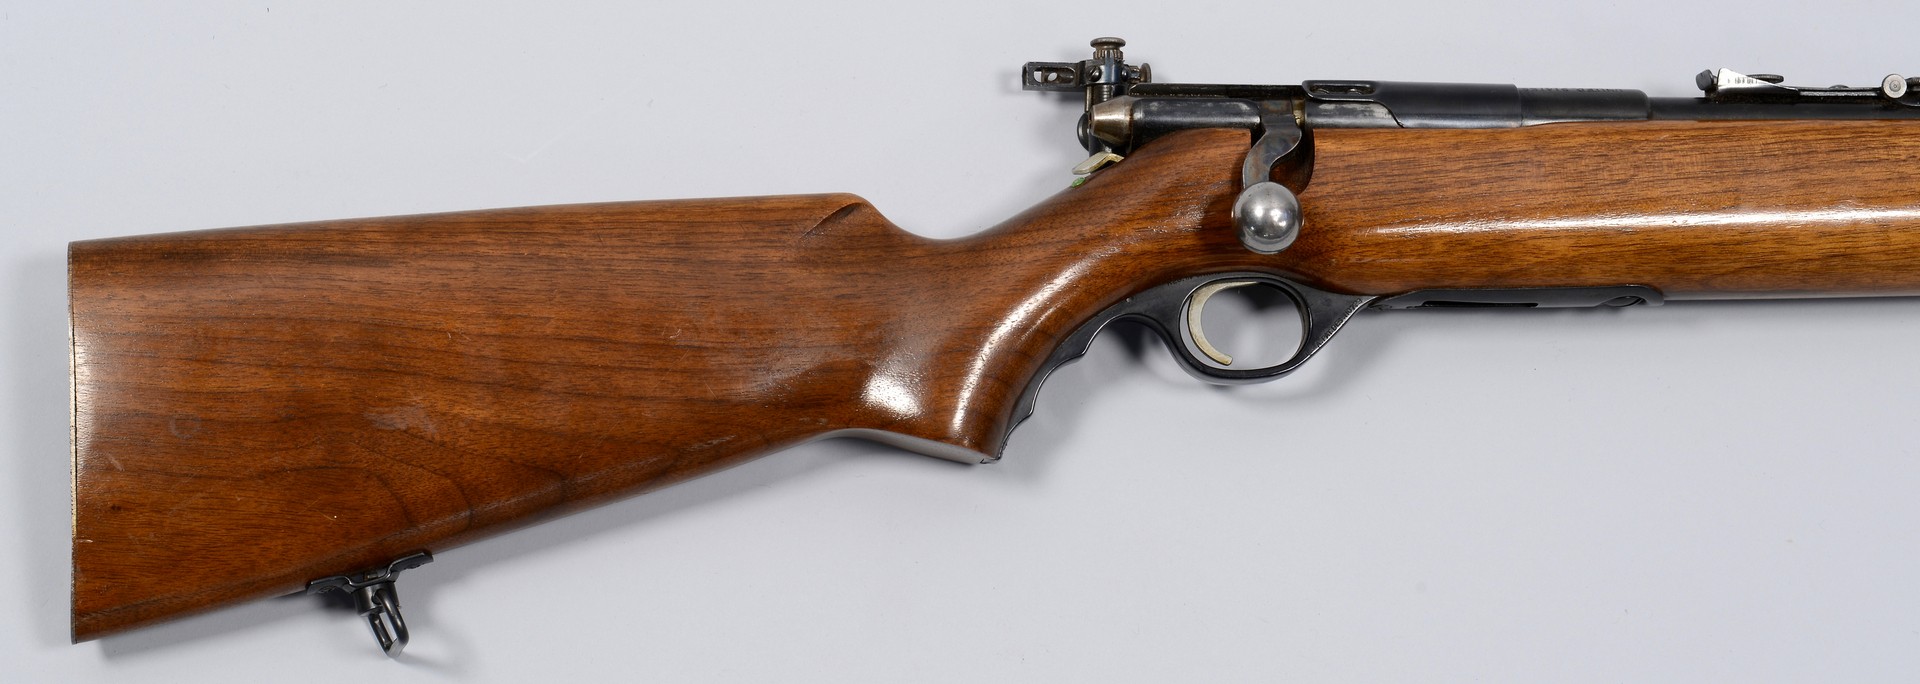 Lot 574: 2 Military bolt-action Rifles